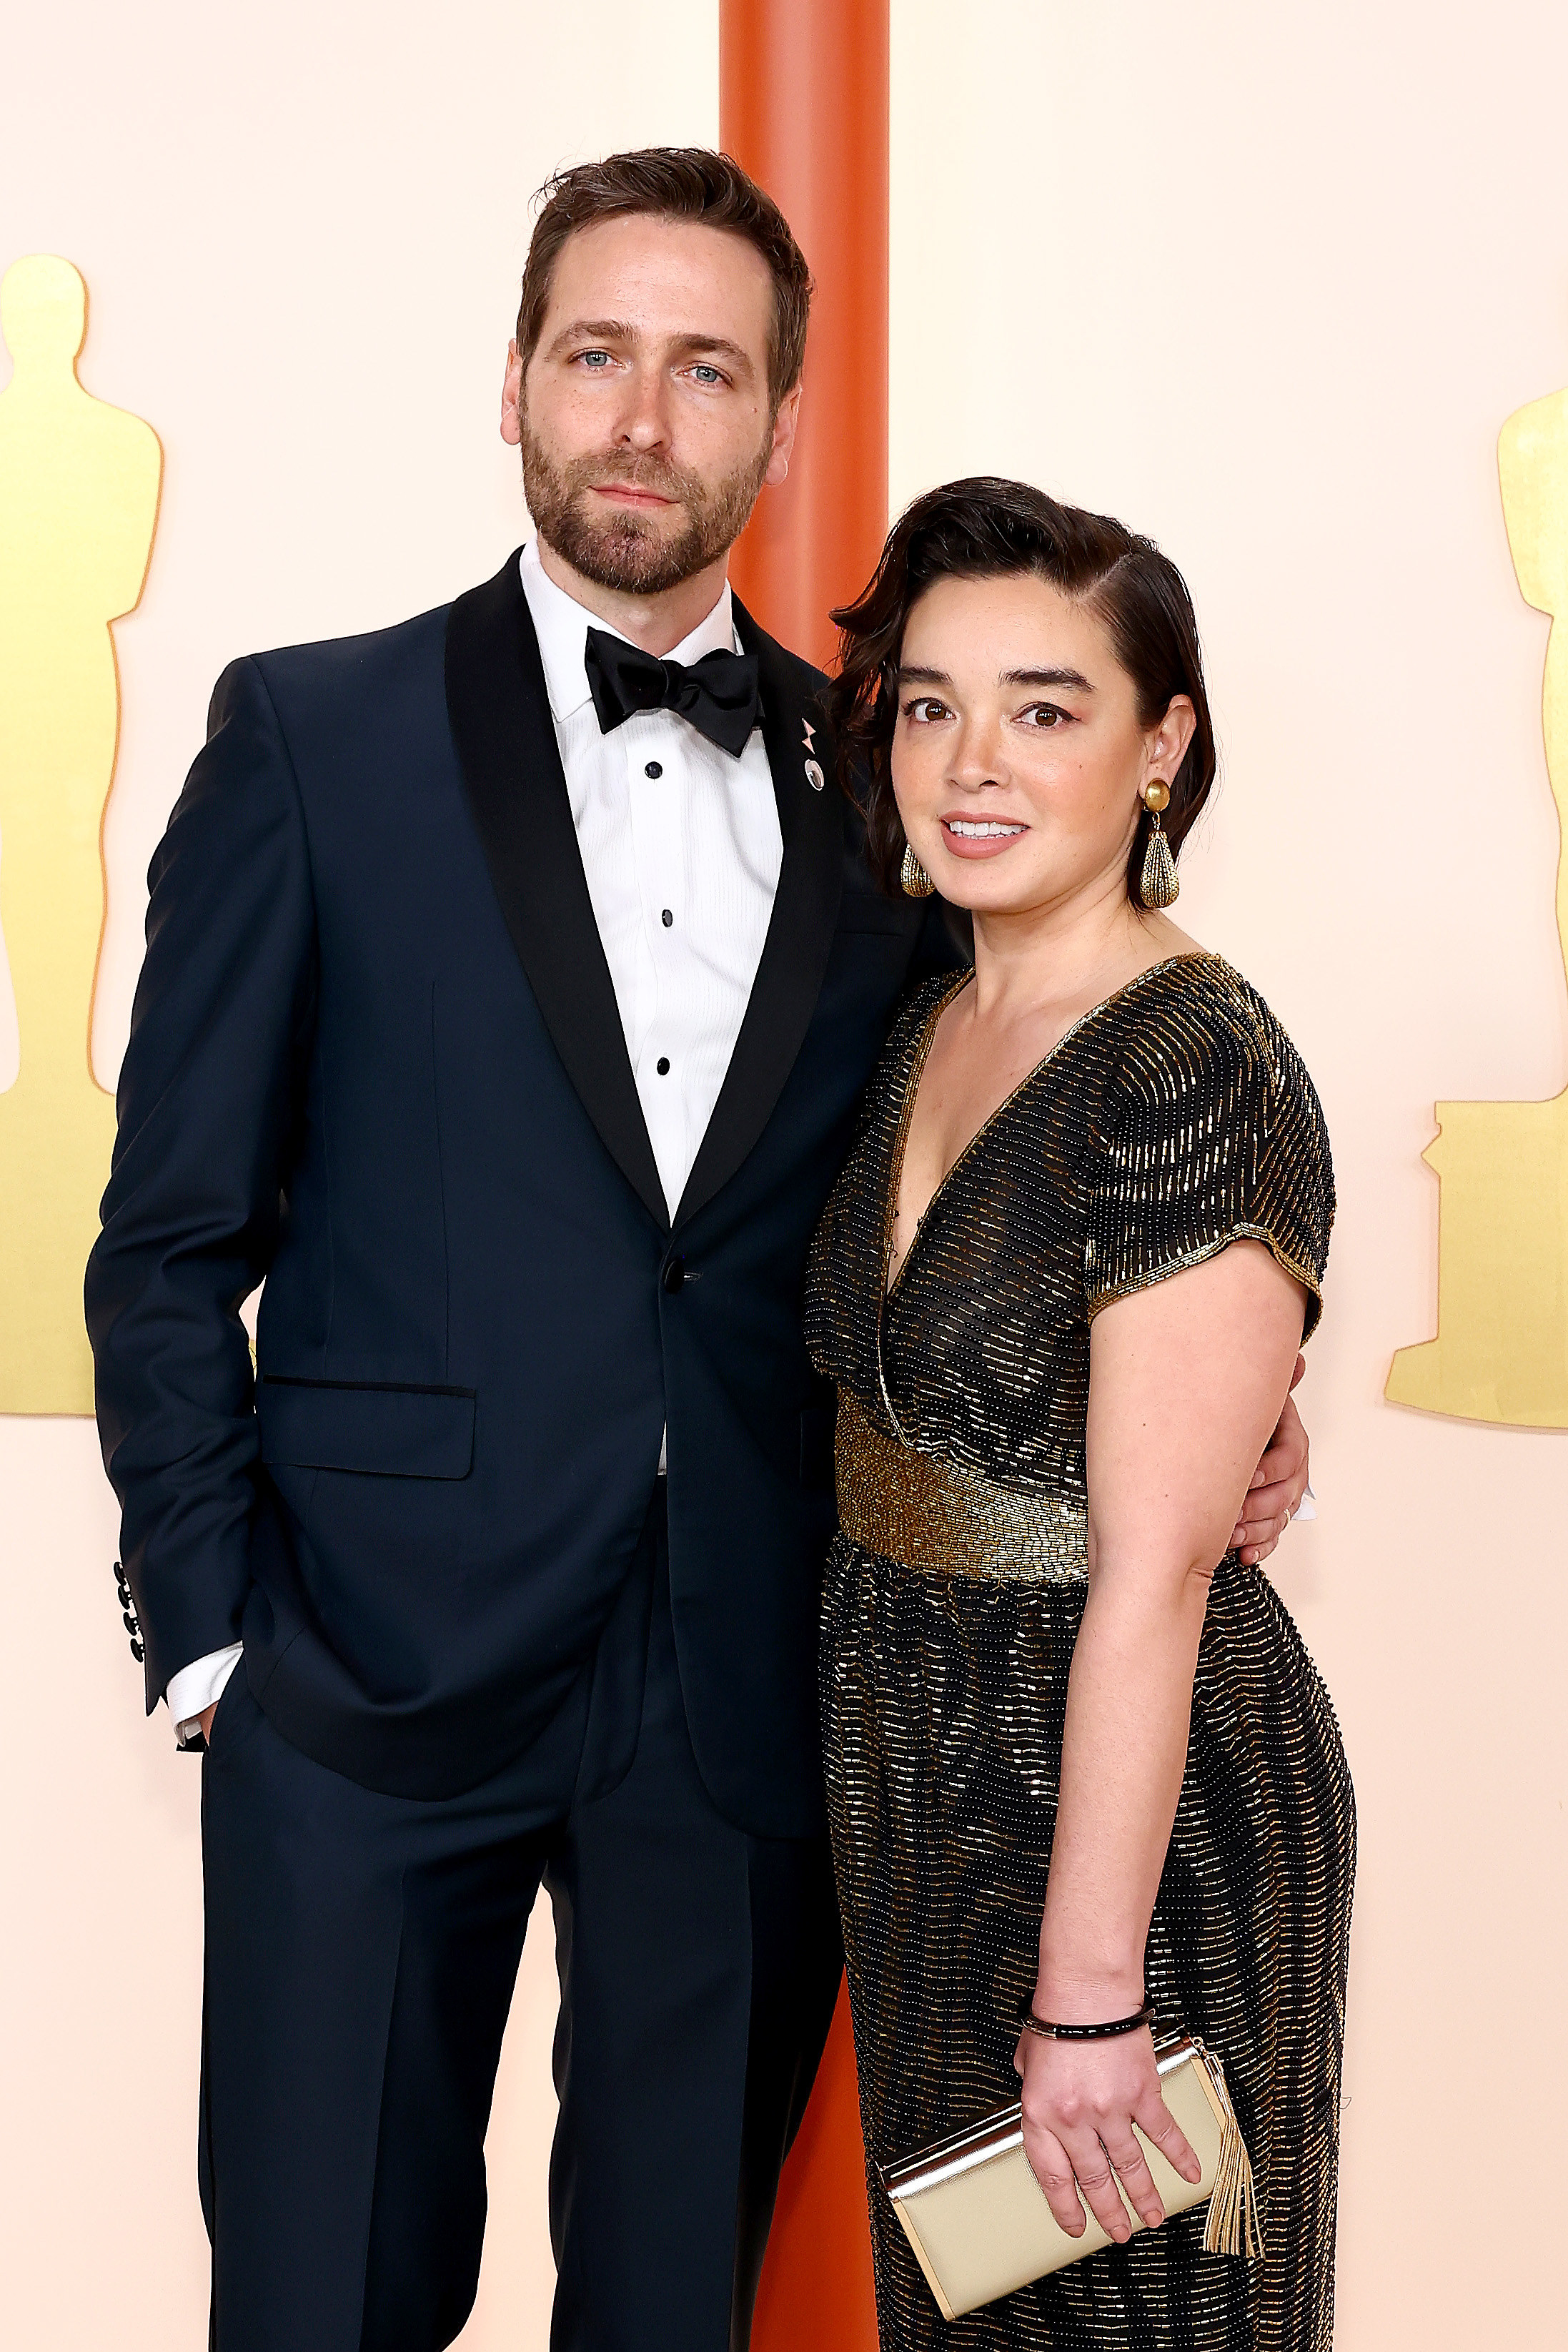 Paul poses on the Oscars red carpet with his wife